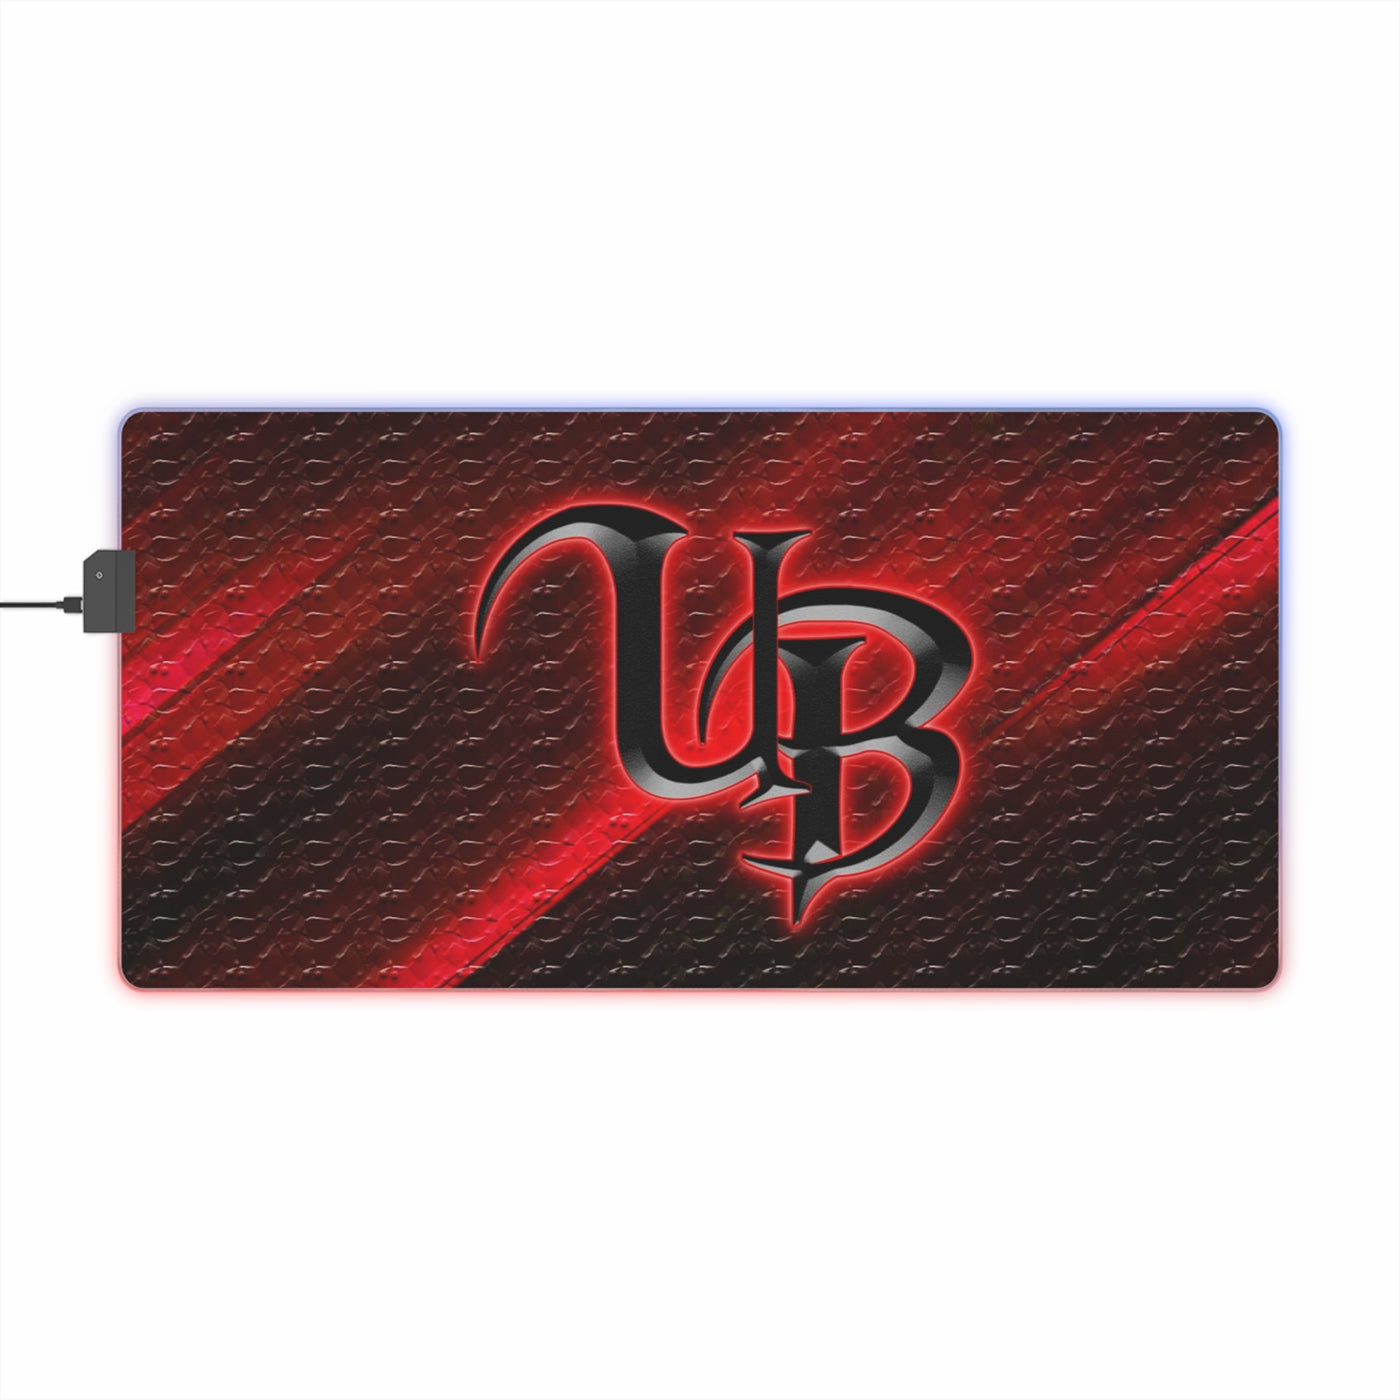  LED Gaming Mouse Pad - Mouse pad designed for gaming with LED lighting, providing enhanced aesthetics and functionality for gaming setups